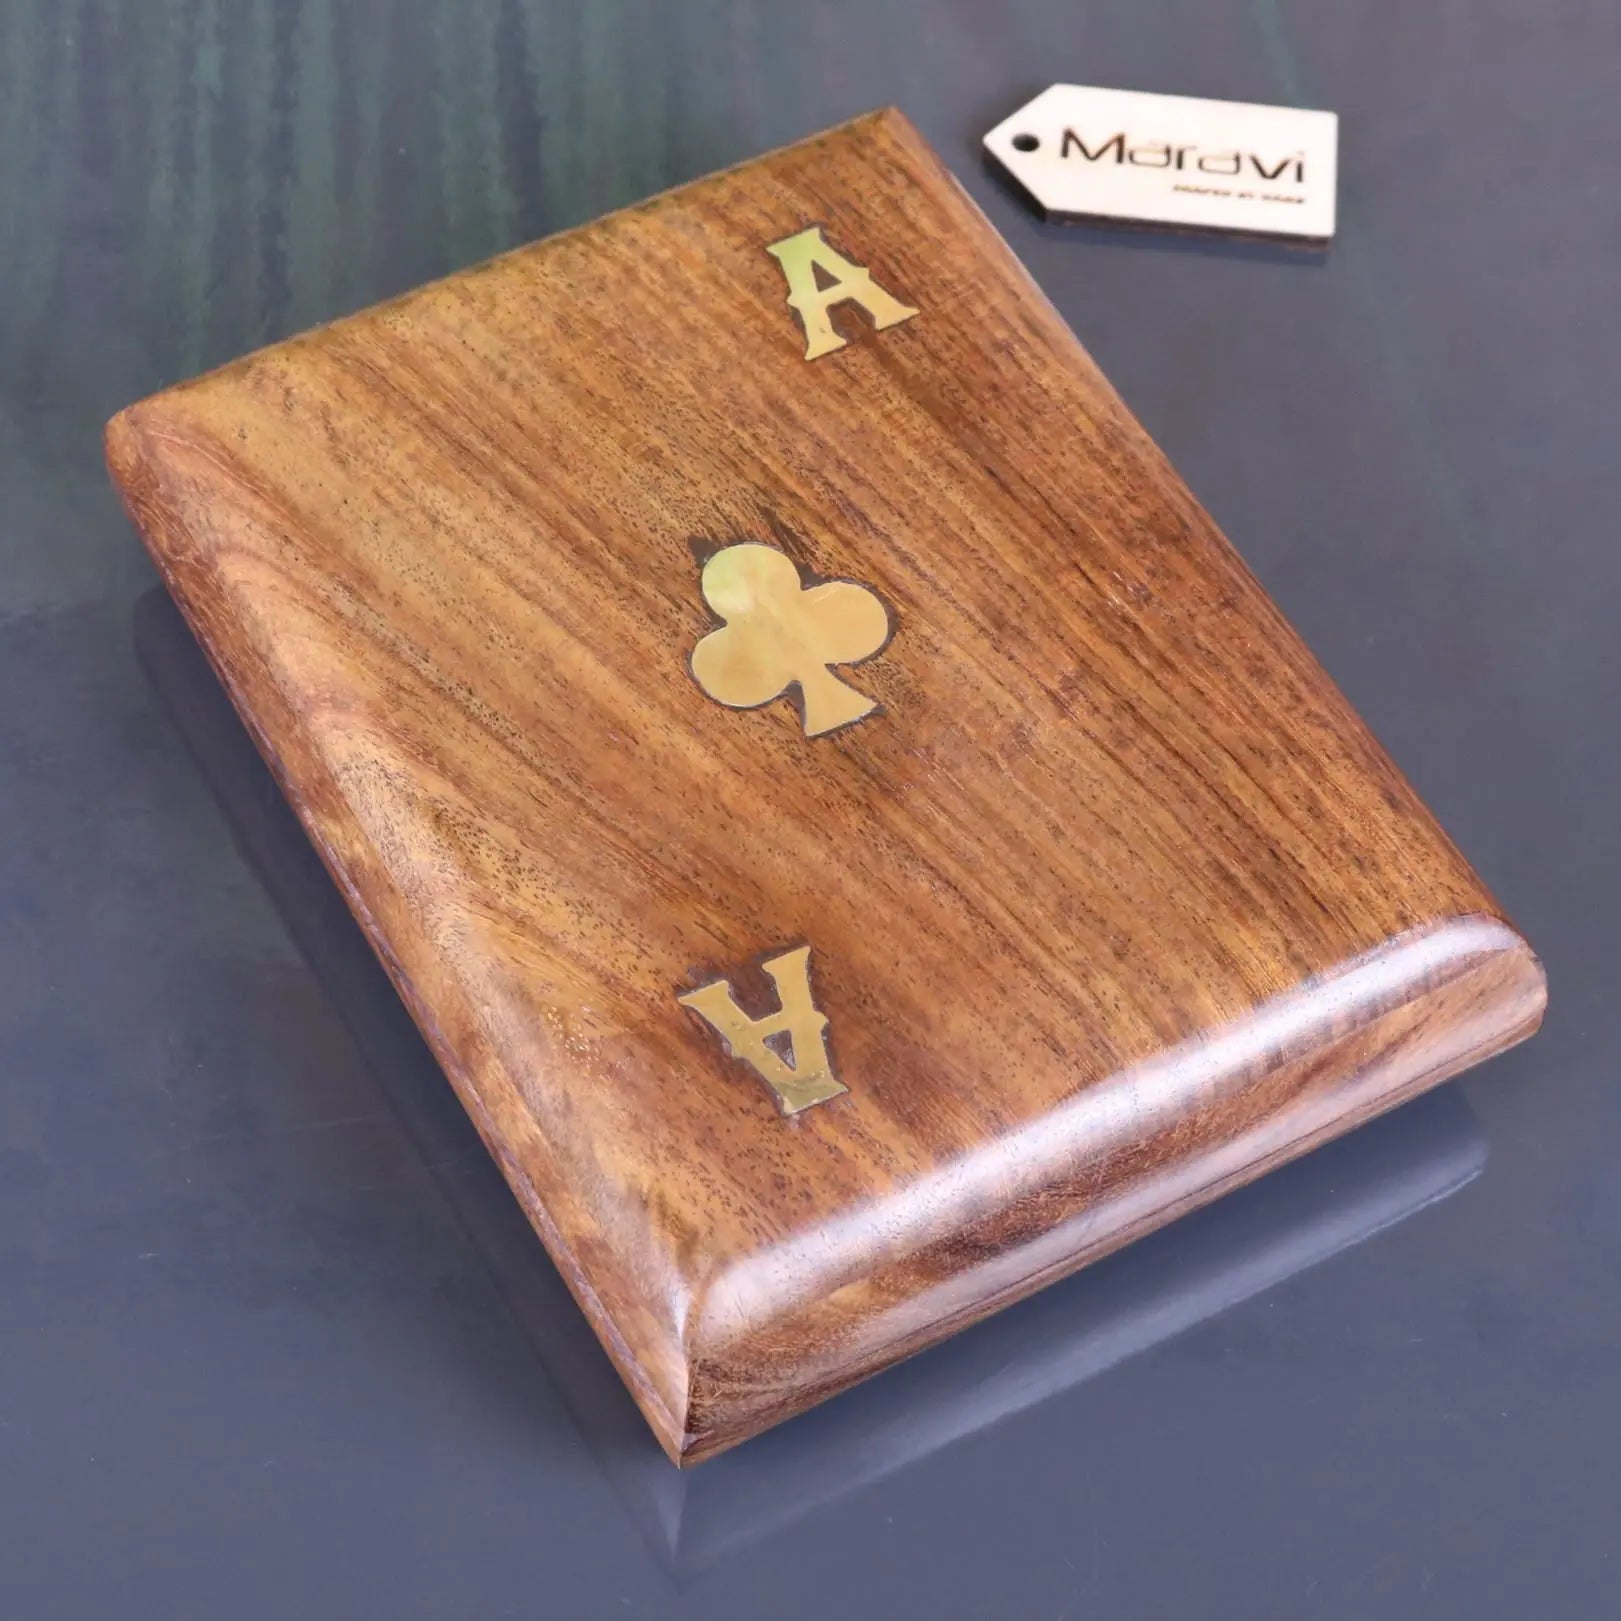 Nadu Double Wooden Playing Card Box - Top View Closed Box